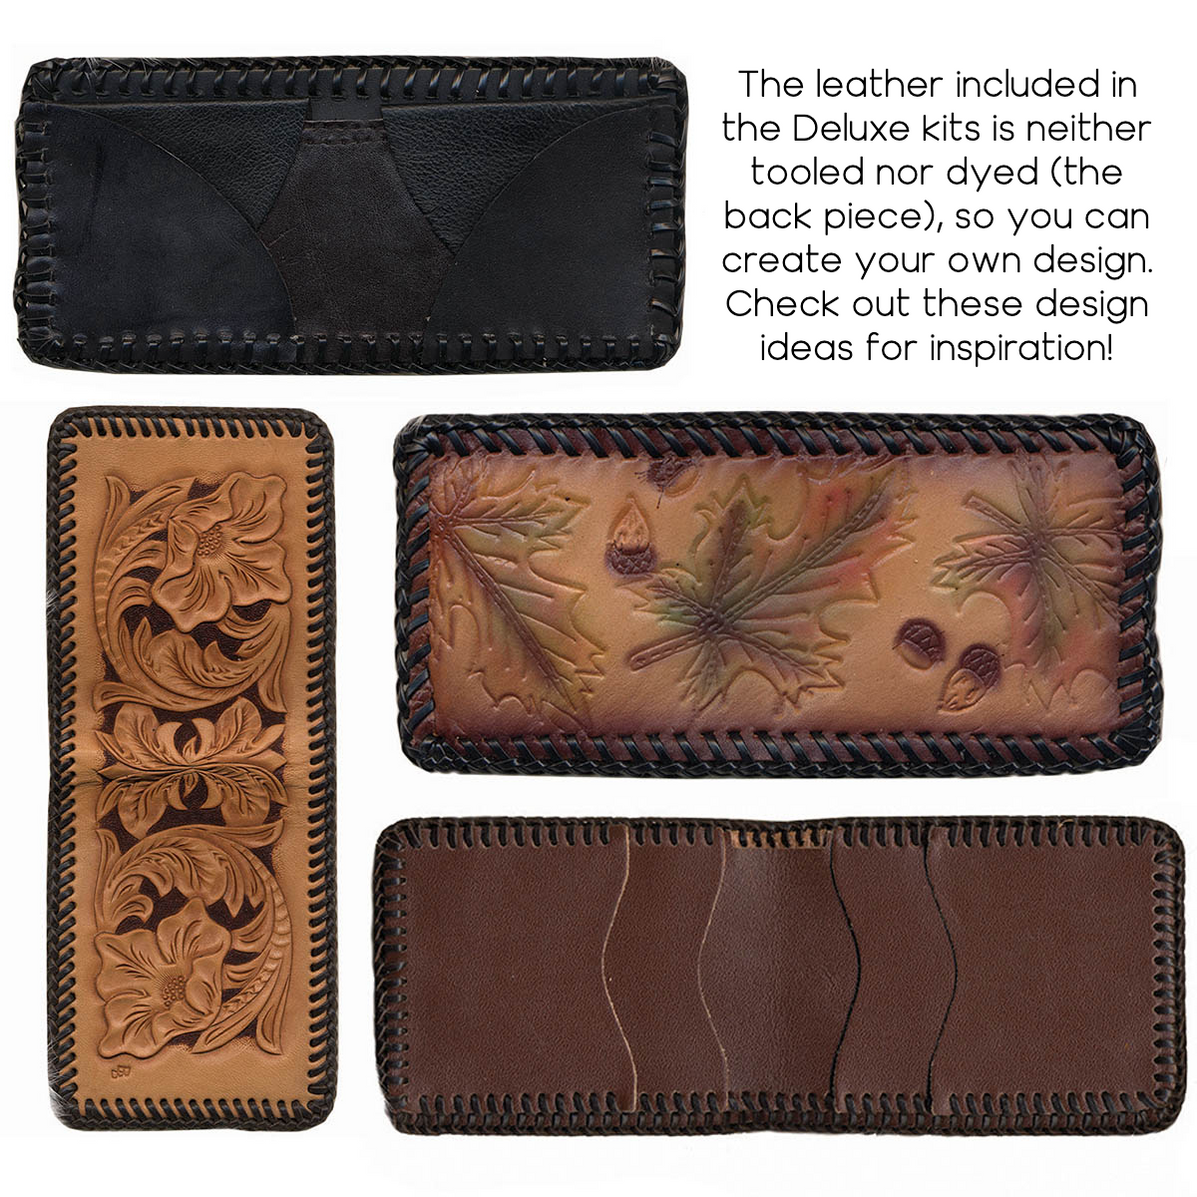 Make Your Own Leather Billfold Wallet Kit - DIY Leather Accessory - Me ...